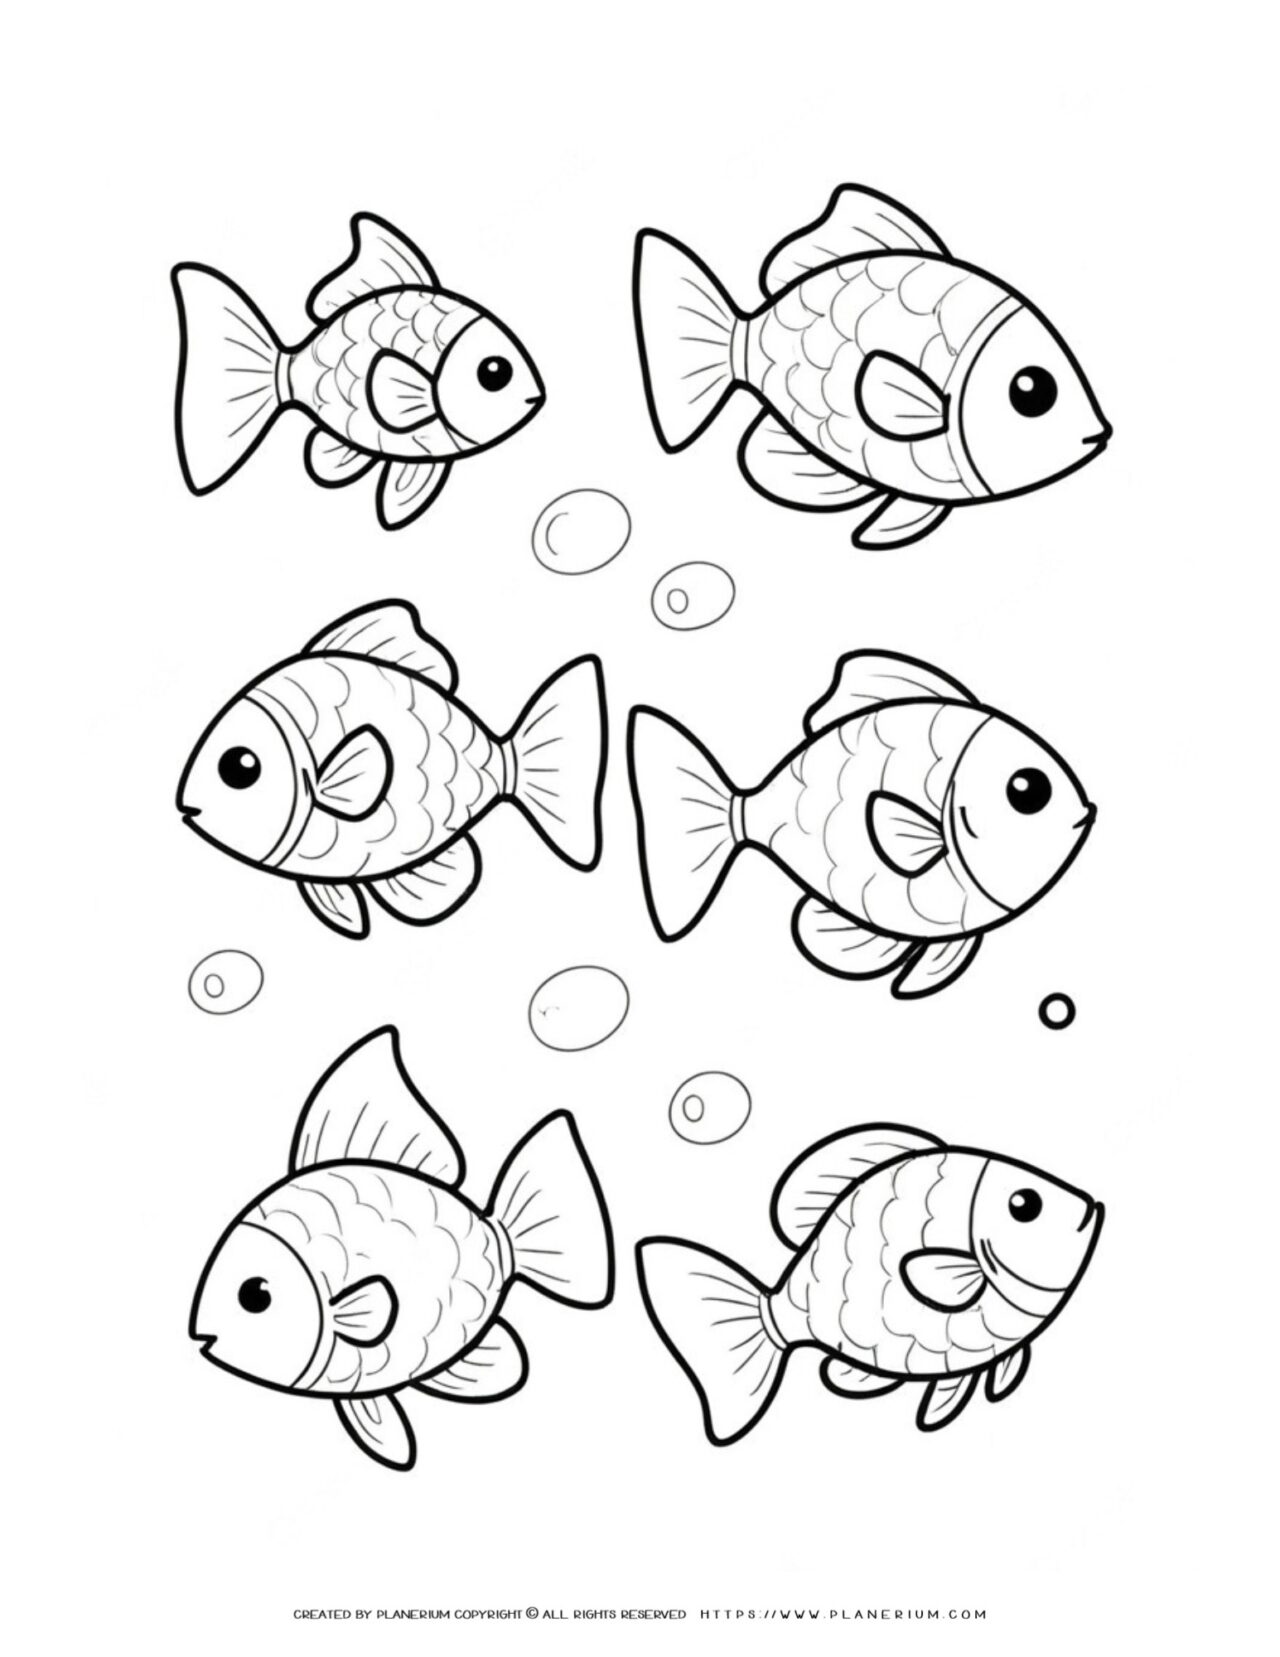 Five-cartoon-goldfish-with-bubbles-black-and-white